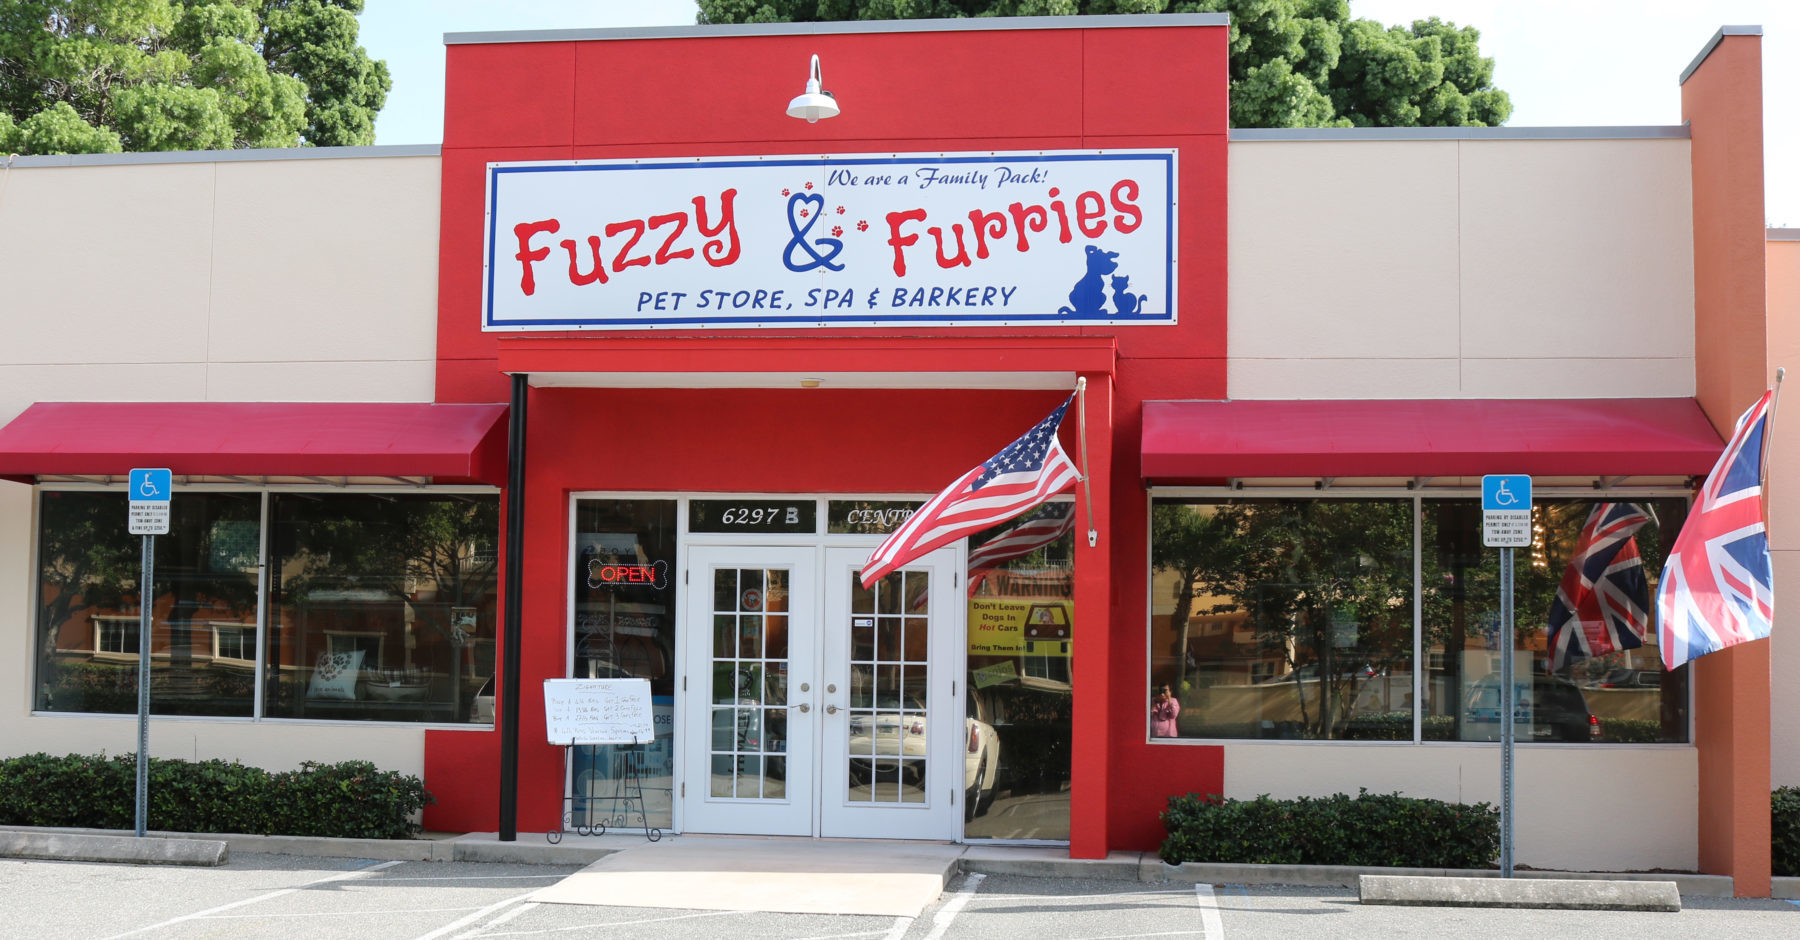 Fuzzy & Furries, Pet Store, Spa & Barkery